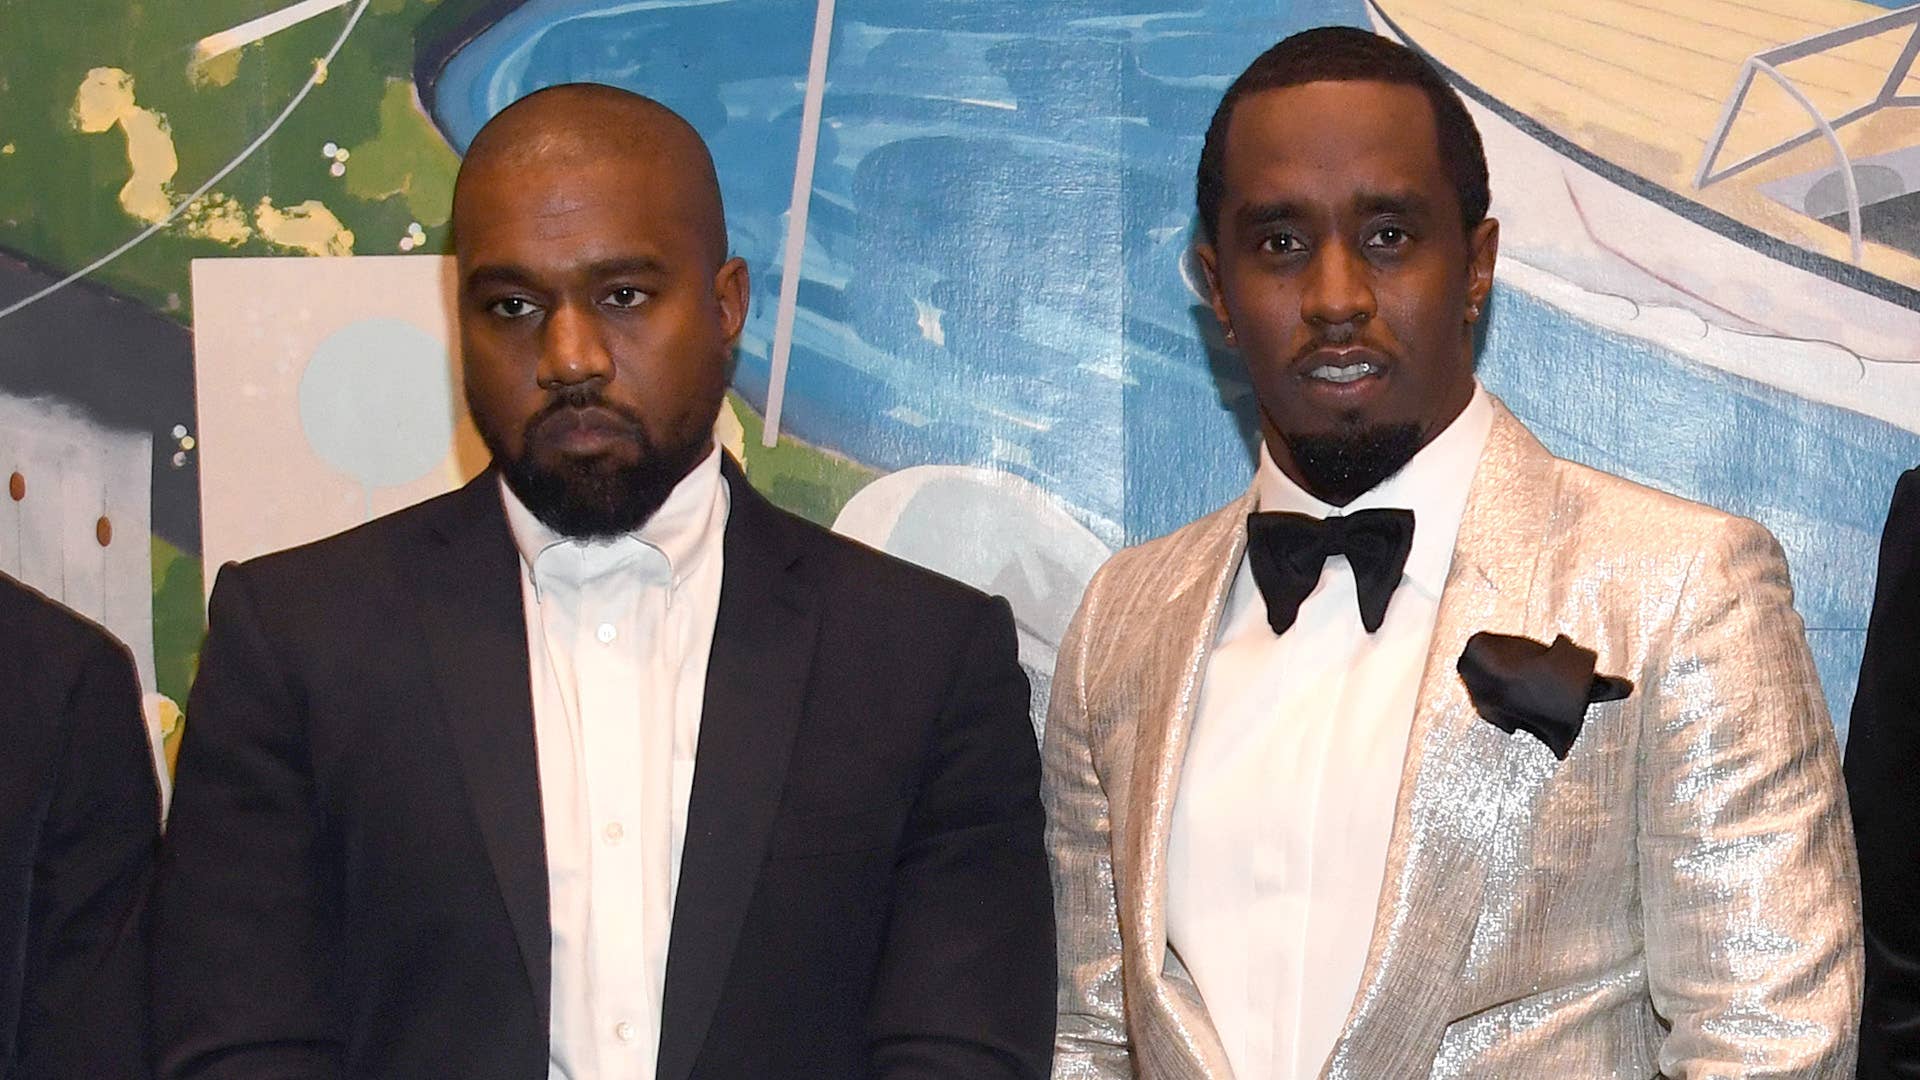 Ye and Diddy are pictured together at an event